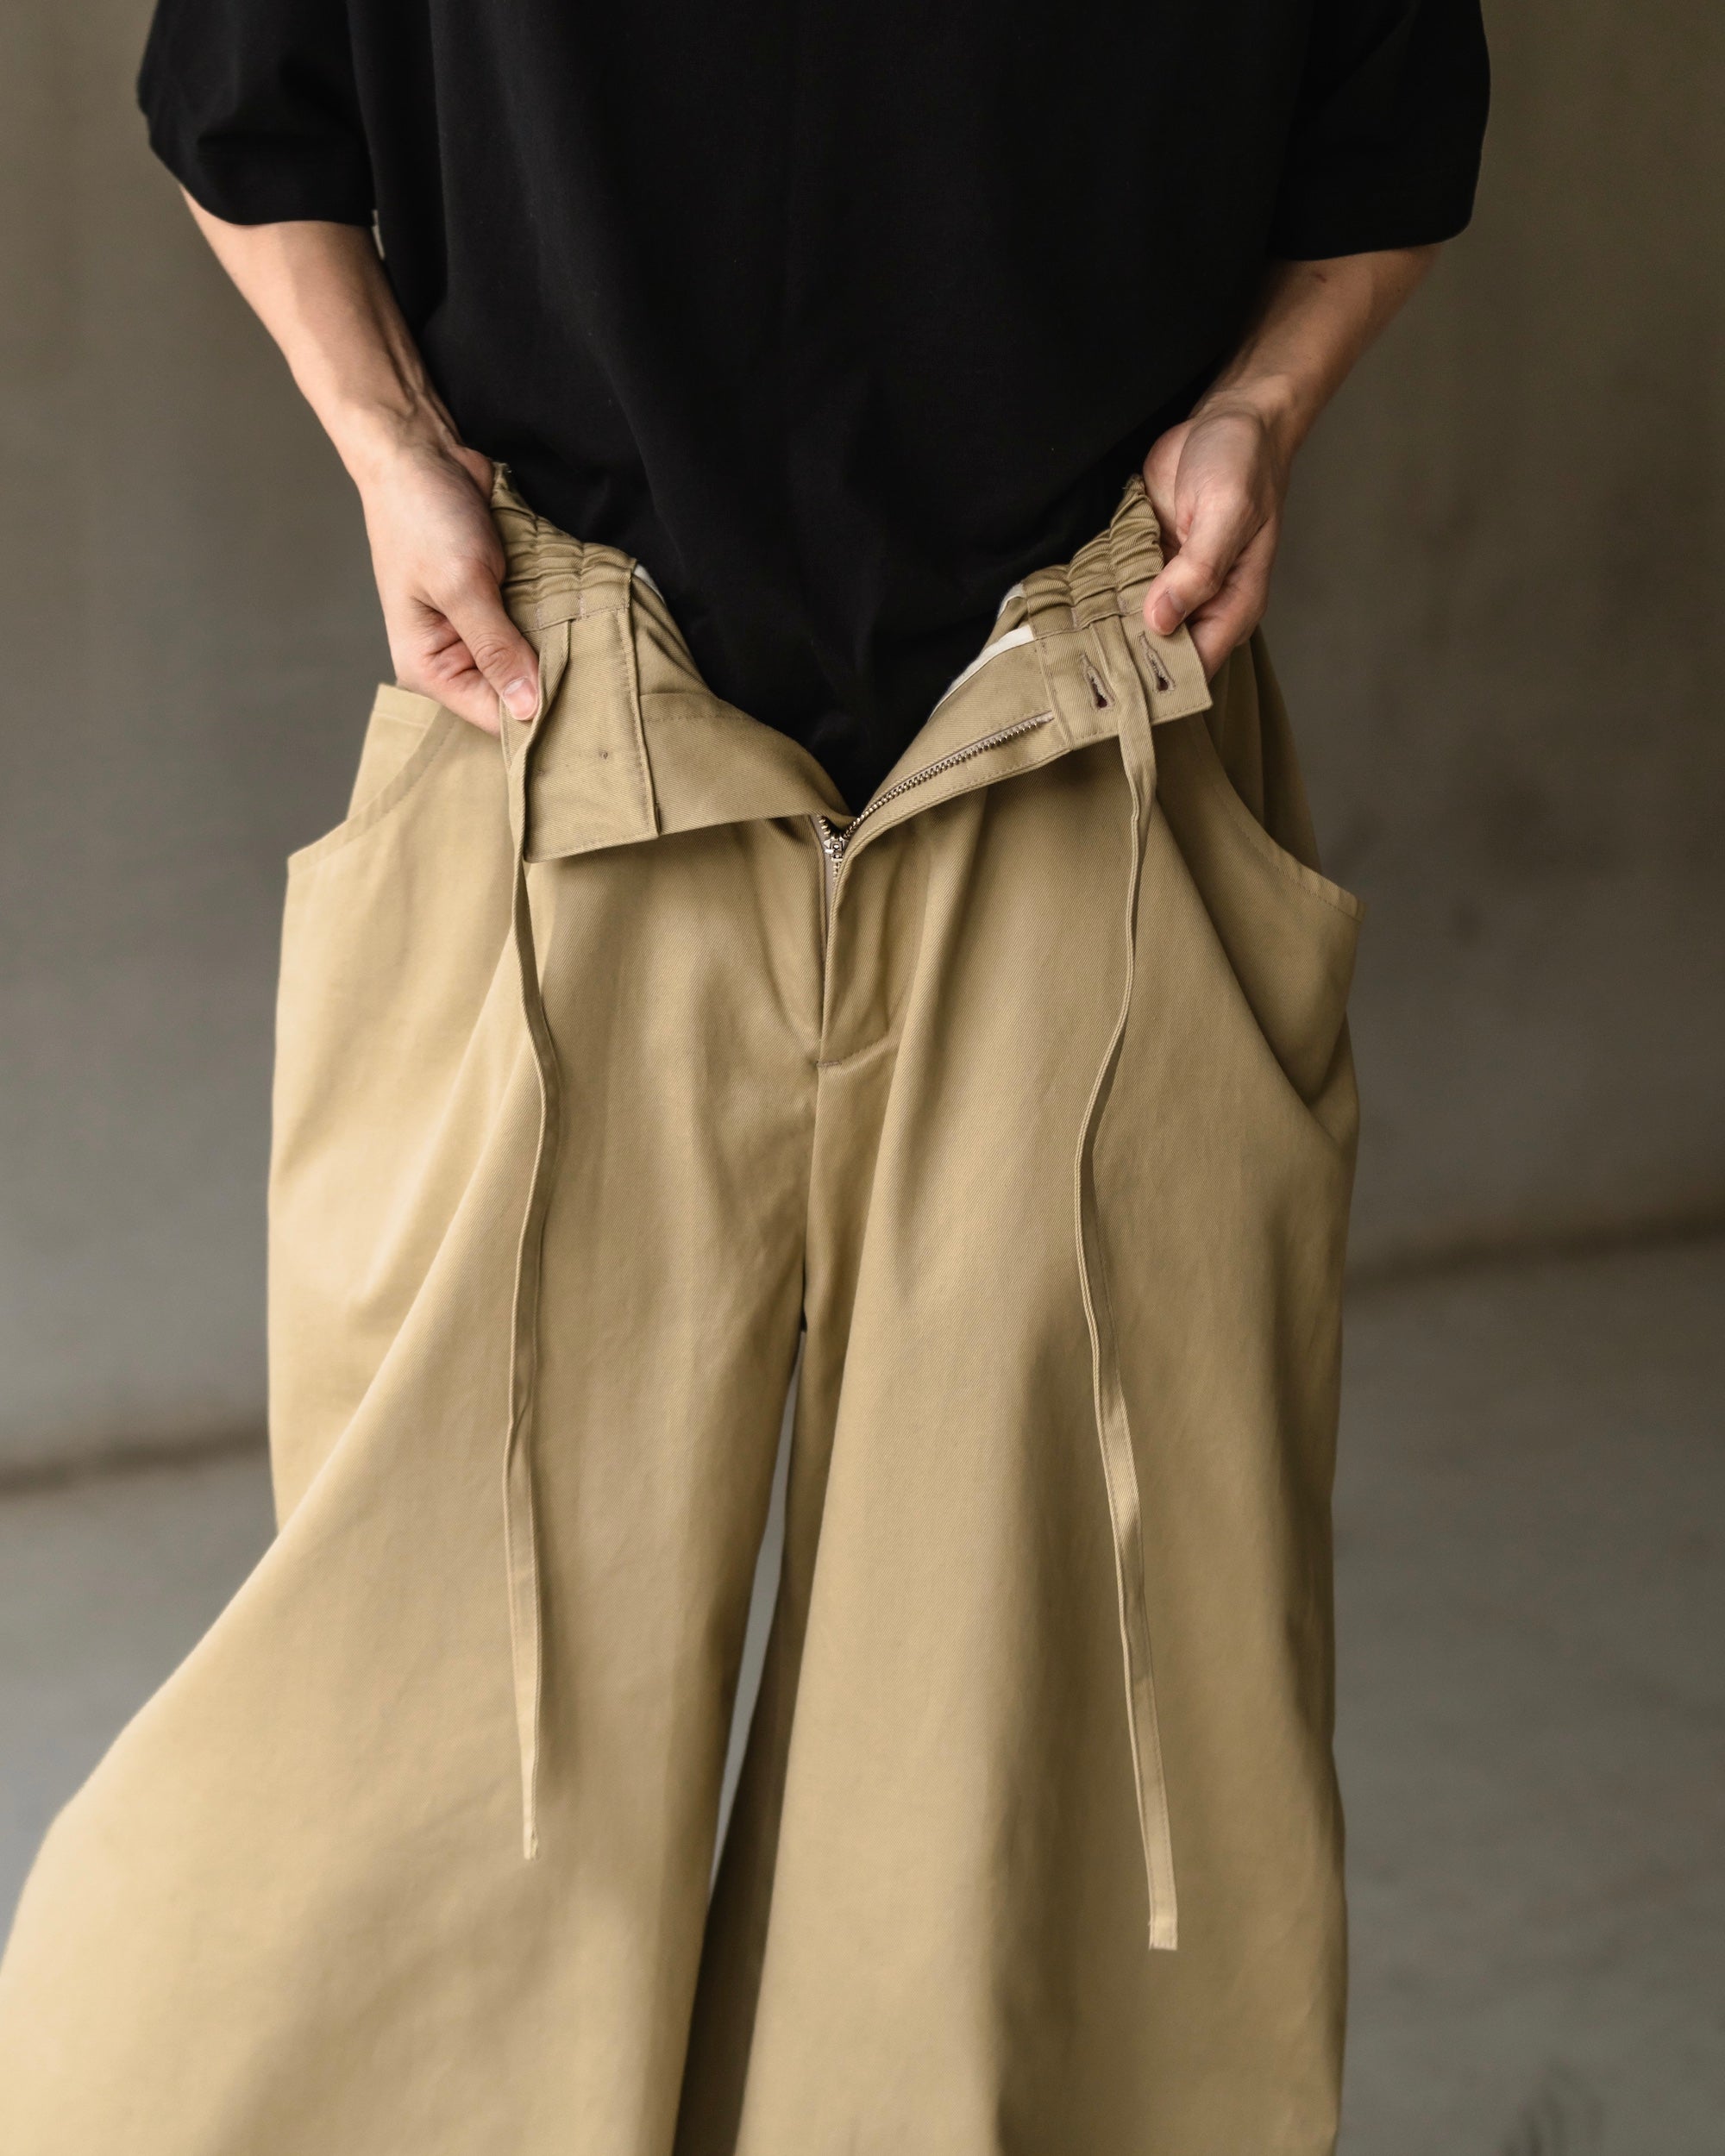 Scheduled to be delivered at the end of May] MASSIVE PANTS